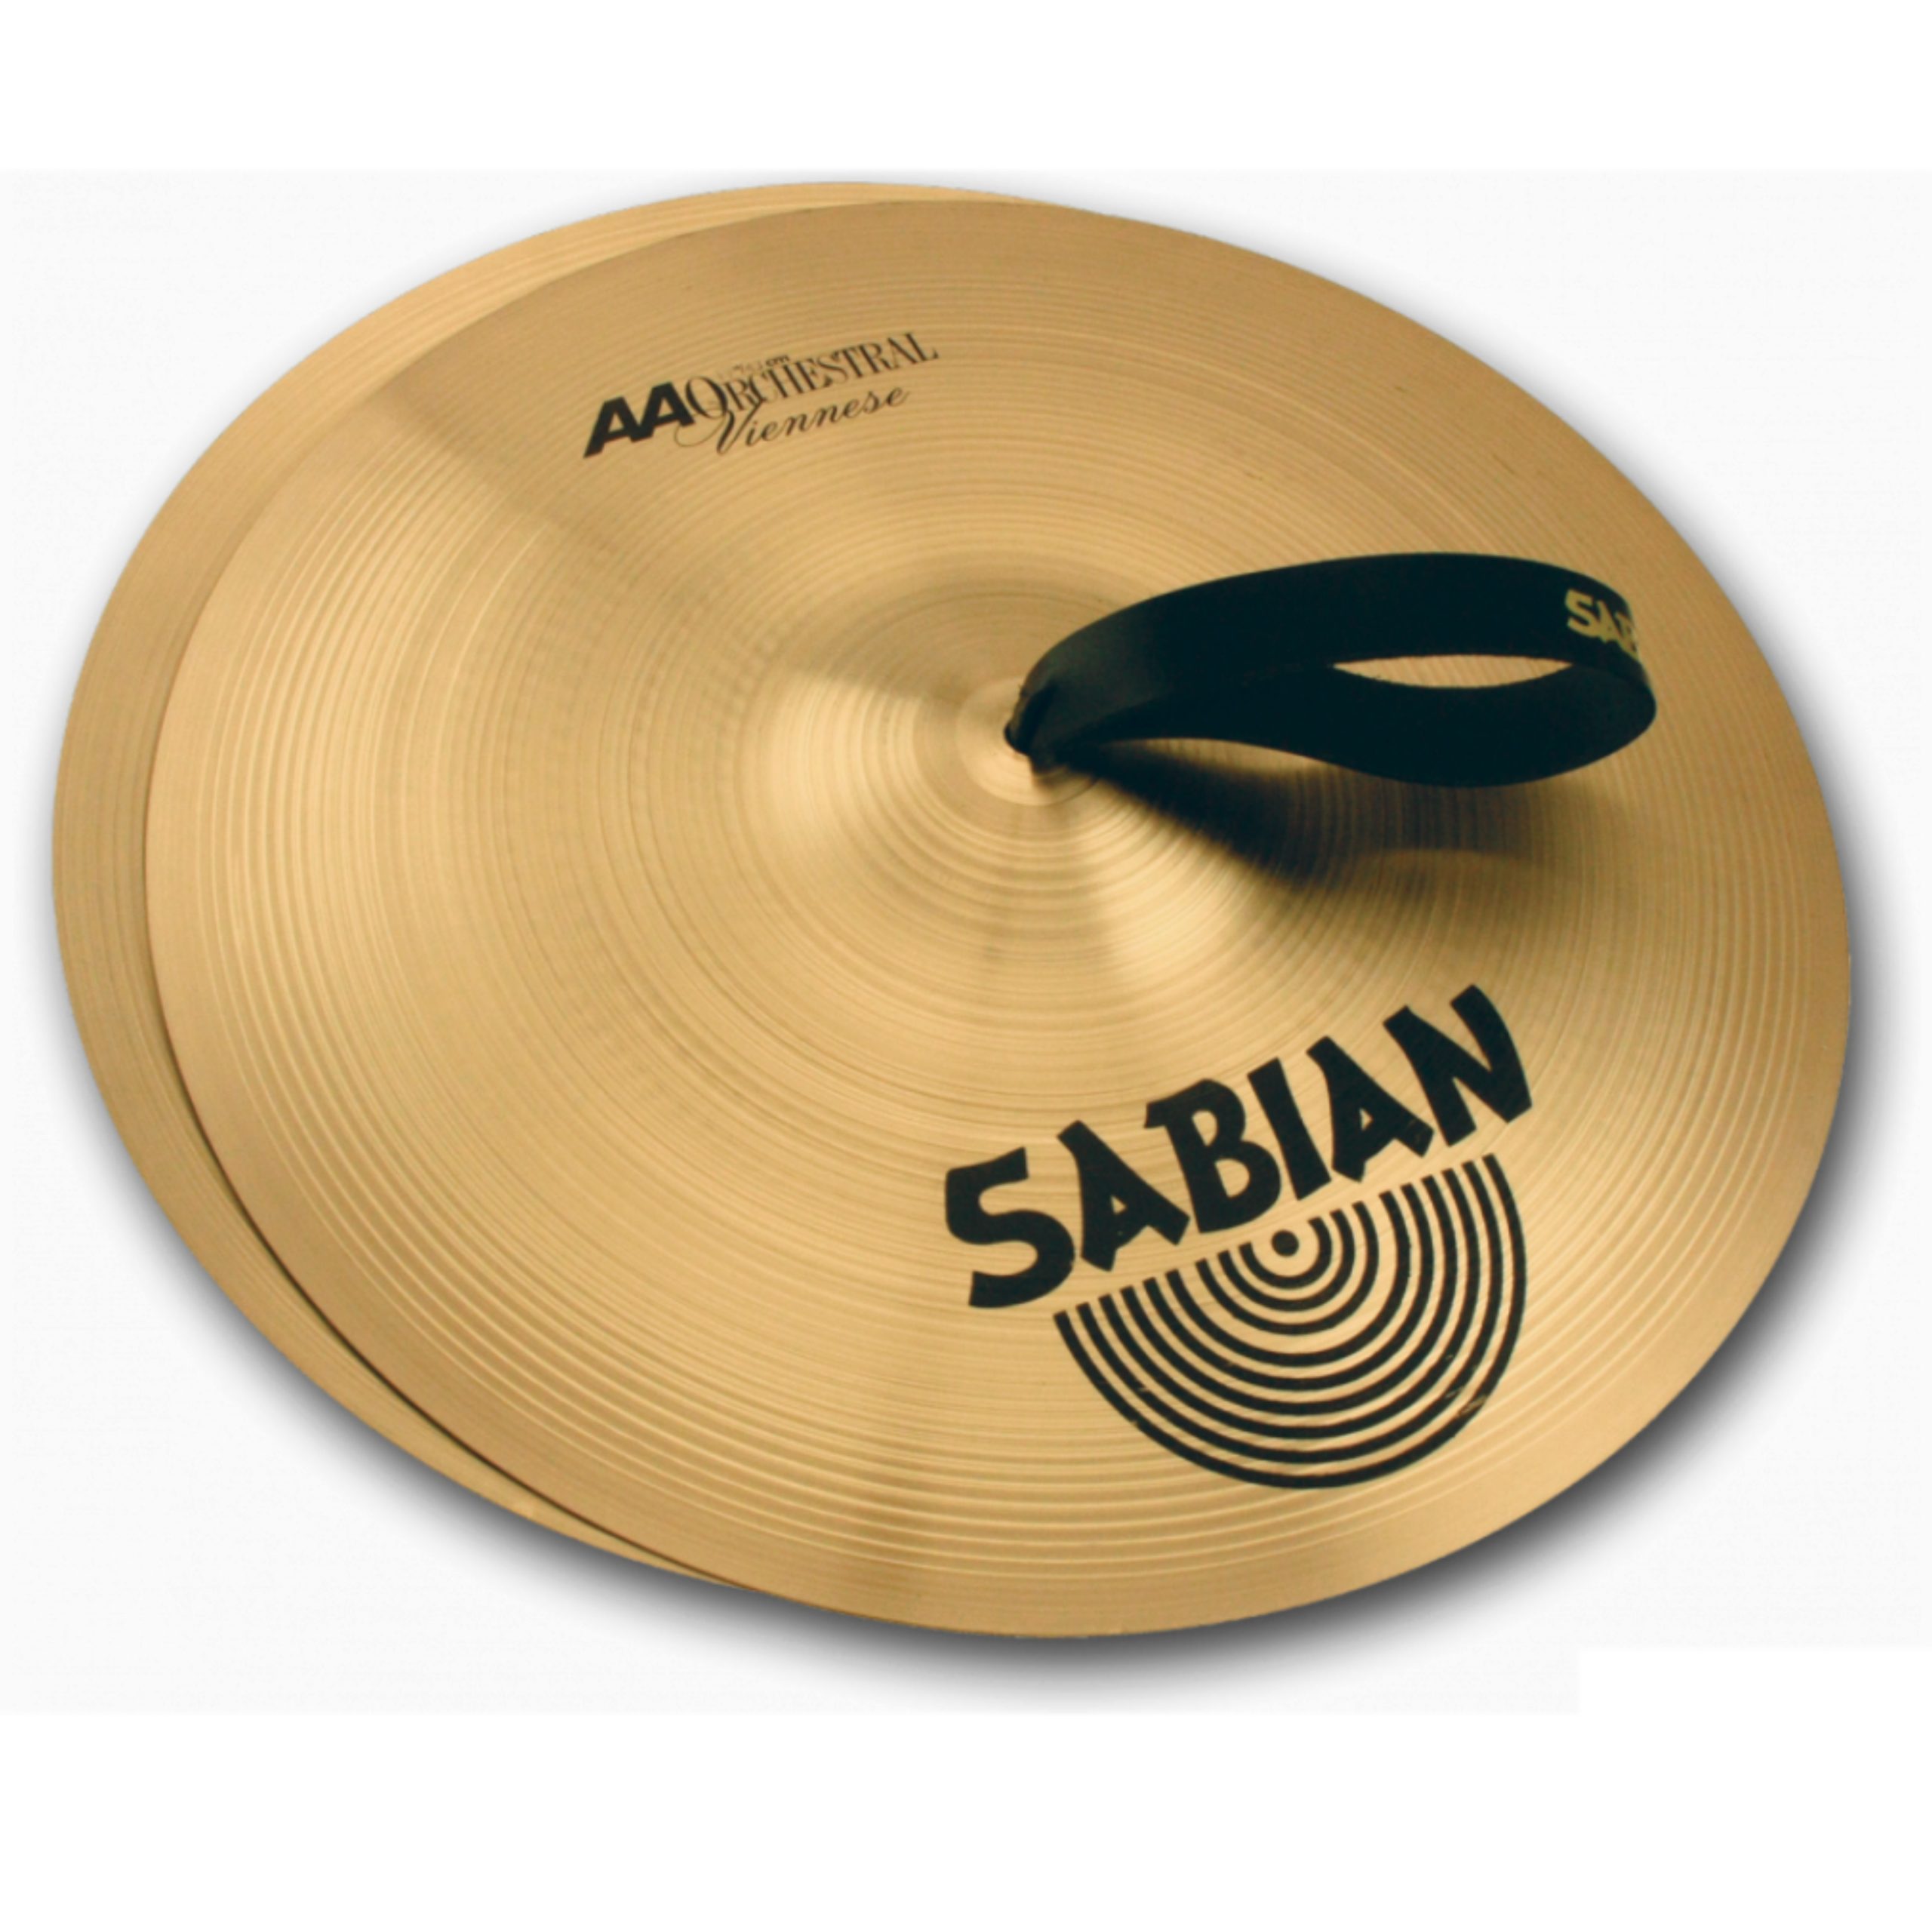 Sabian 18" AA Orchestral-Band Viennese pair